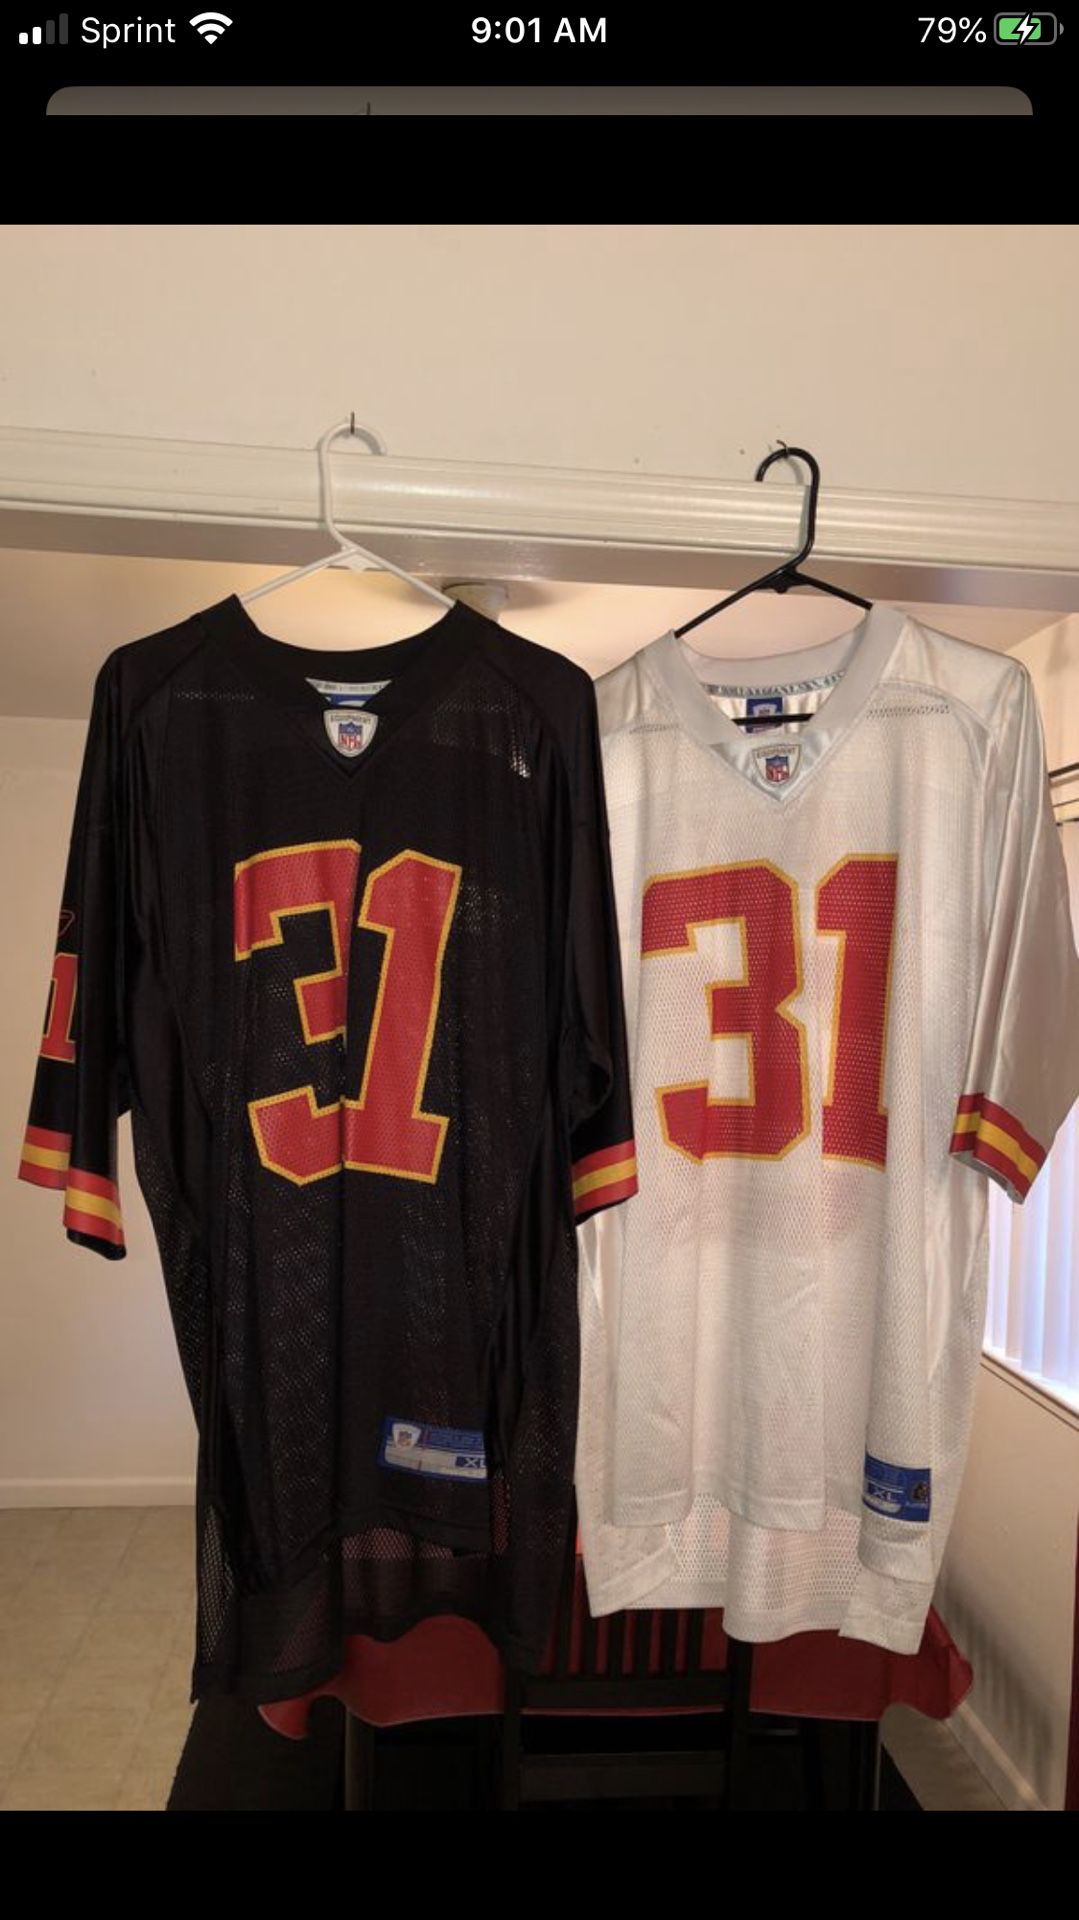 These are Reebok NFL Chiefs game jerseys from early 2000